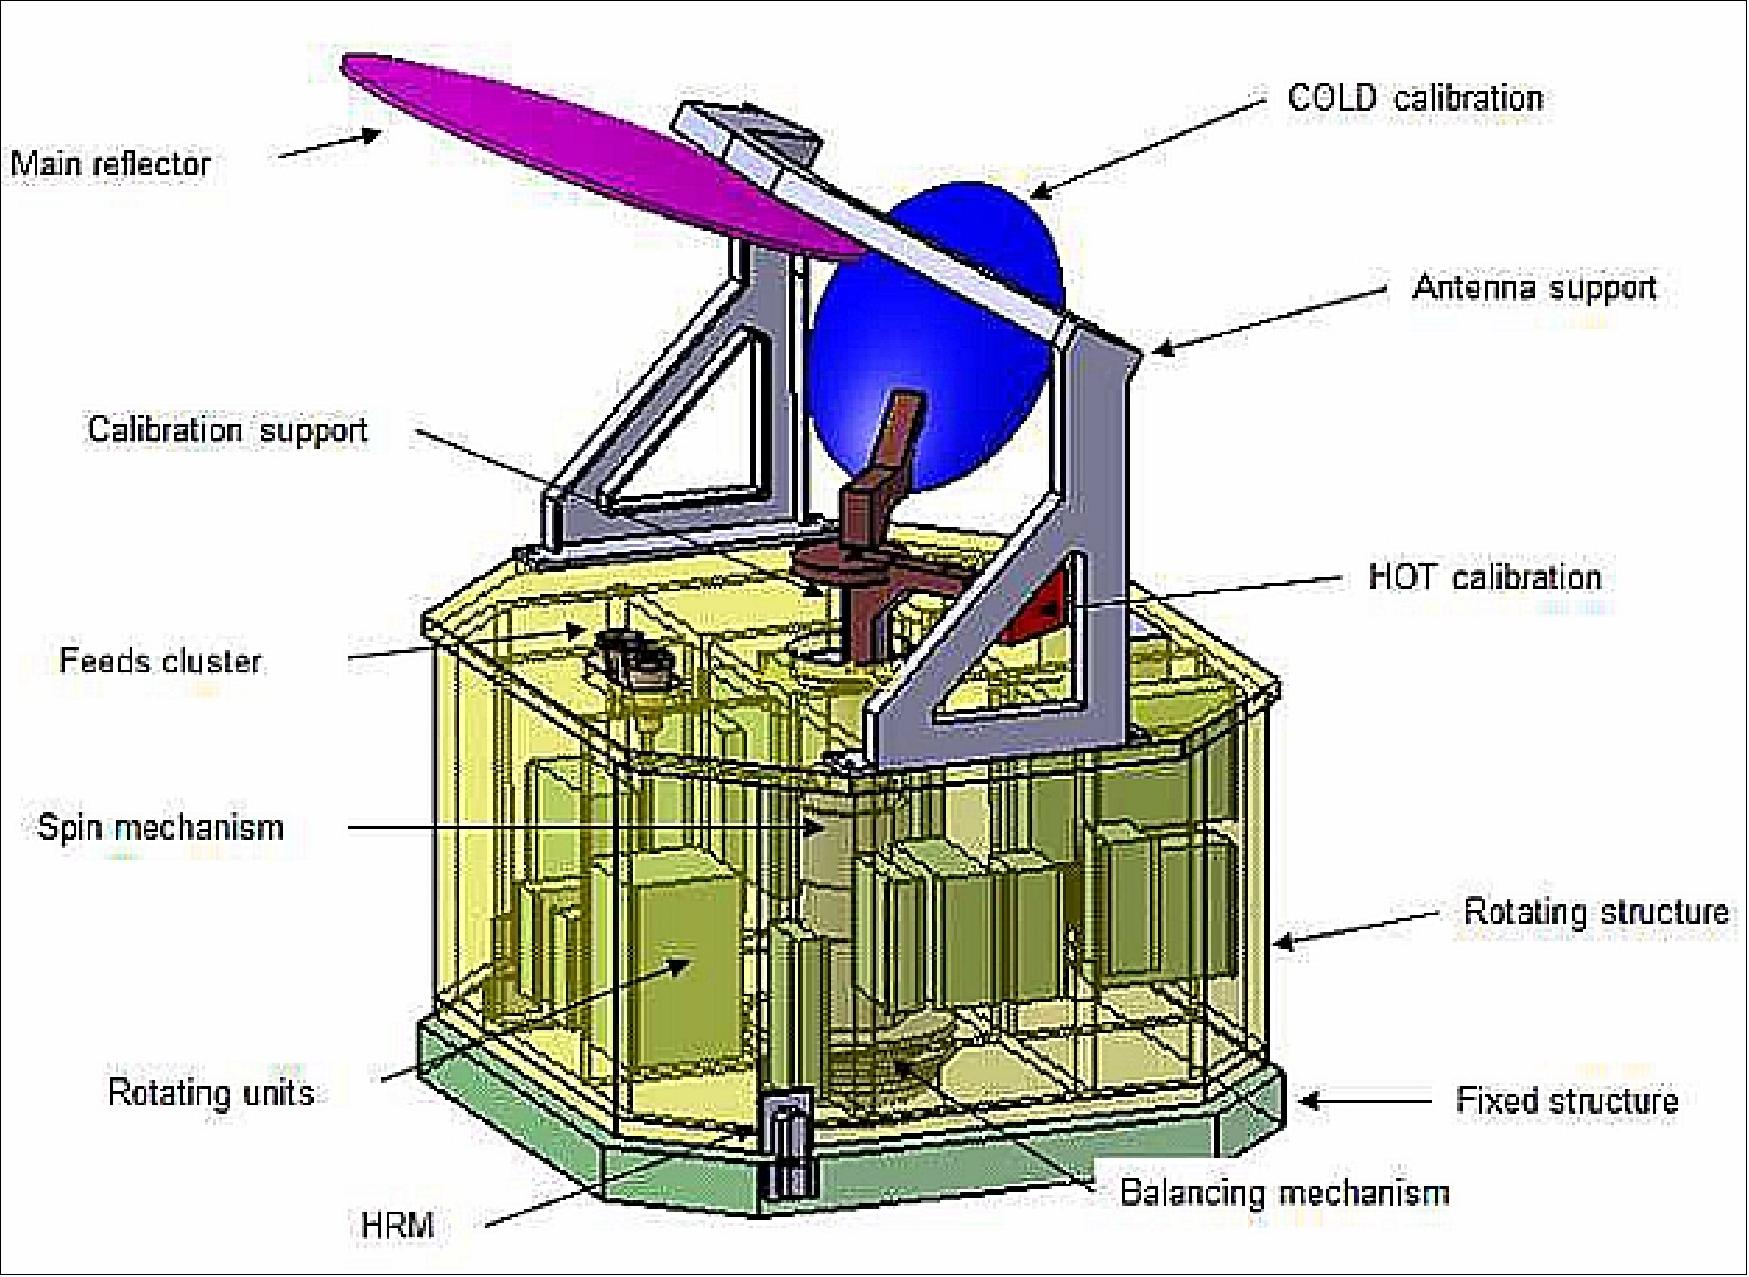 Figure 18: Mechanical layout of MWI radiometer (image credit: Airbus DS, CGS)